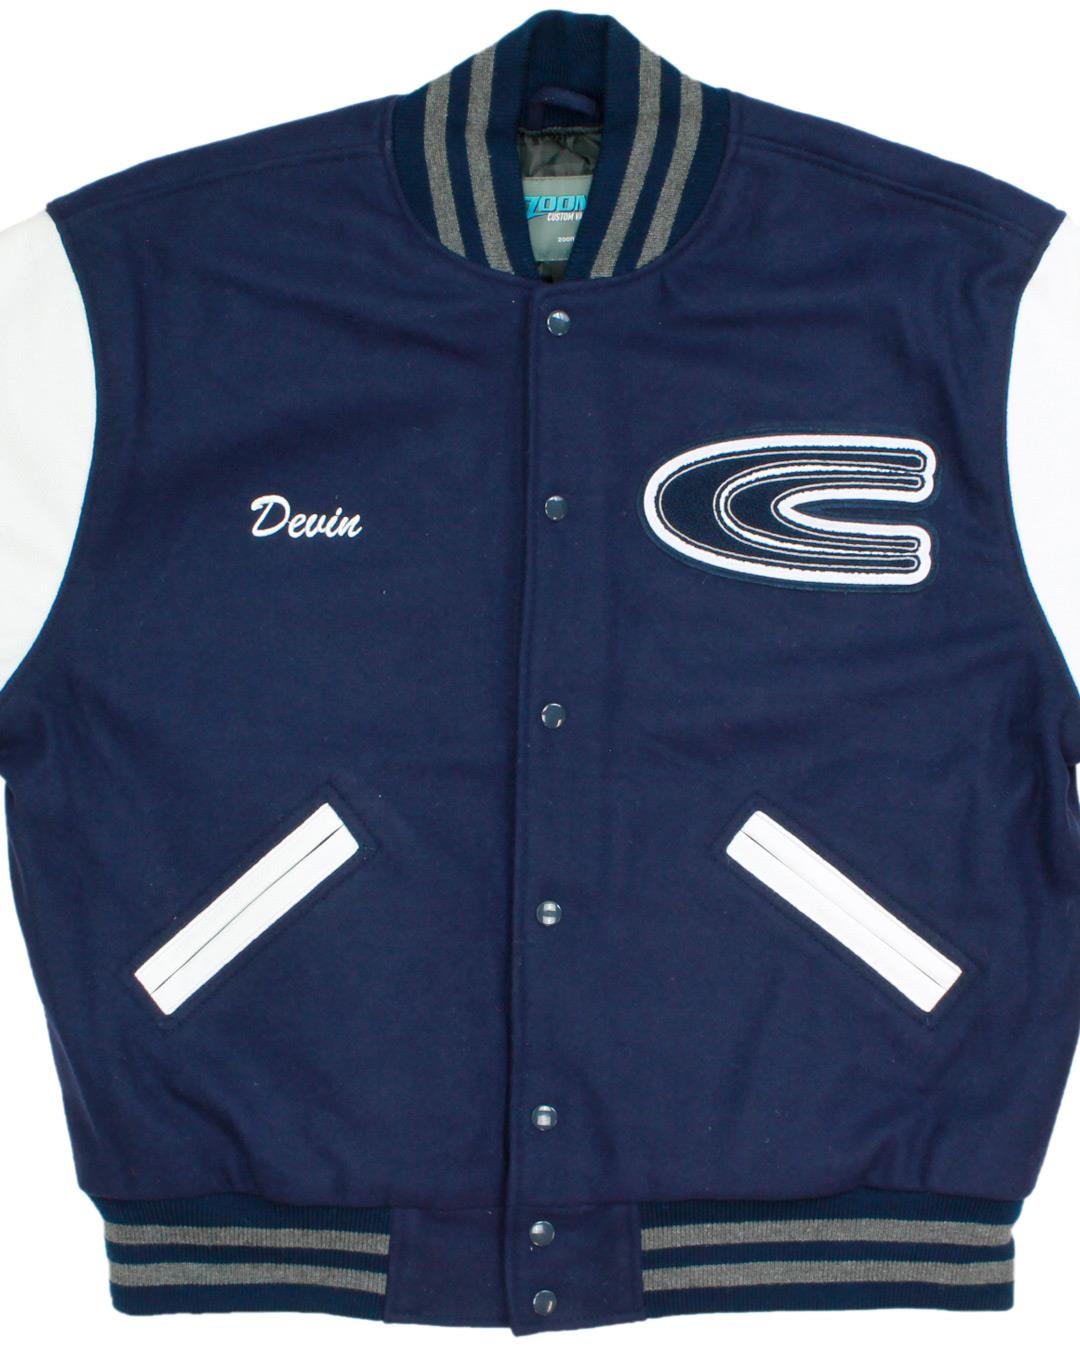 Clay-Chalkville High School Cougars Letterman, Pinson, AL - Front